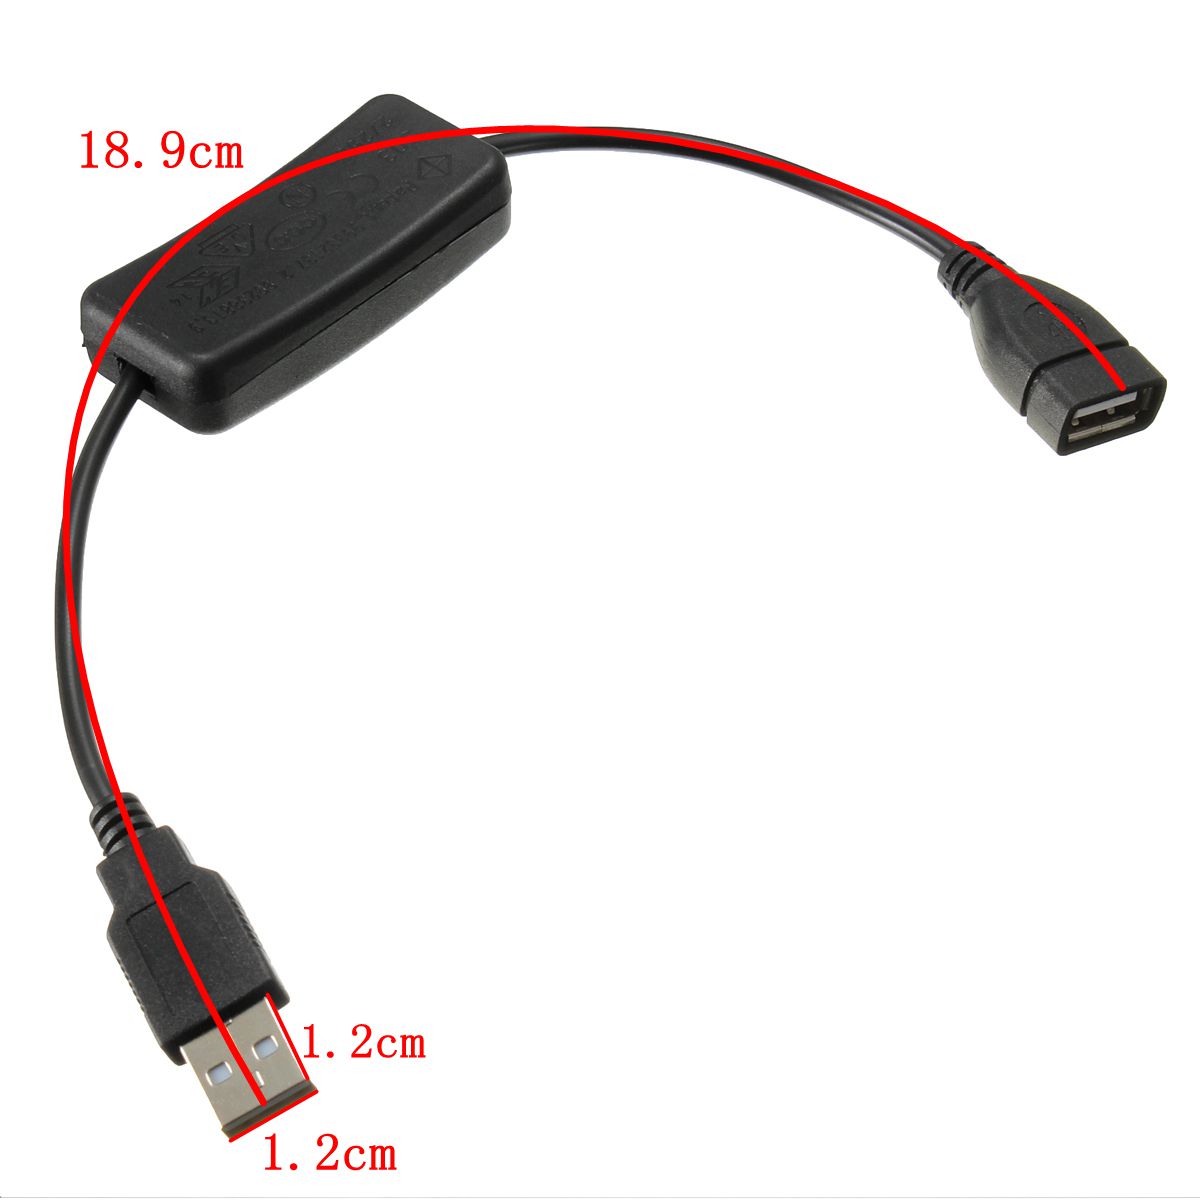 3PCS-USB-Power-Cable-With-OnOff-Switch-For-Raspberry-Pi-1218762